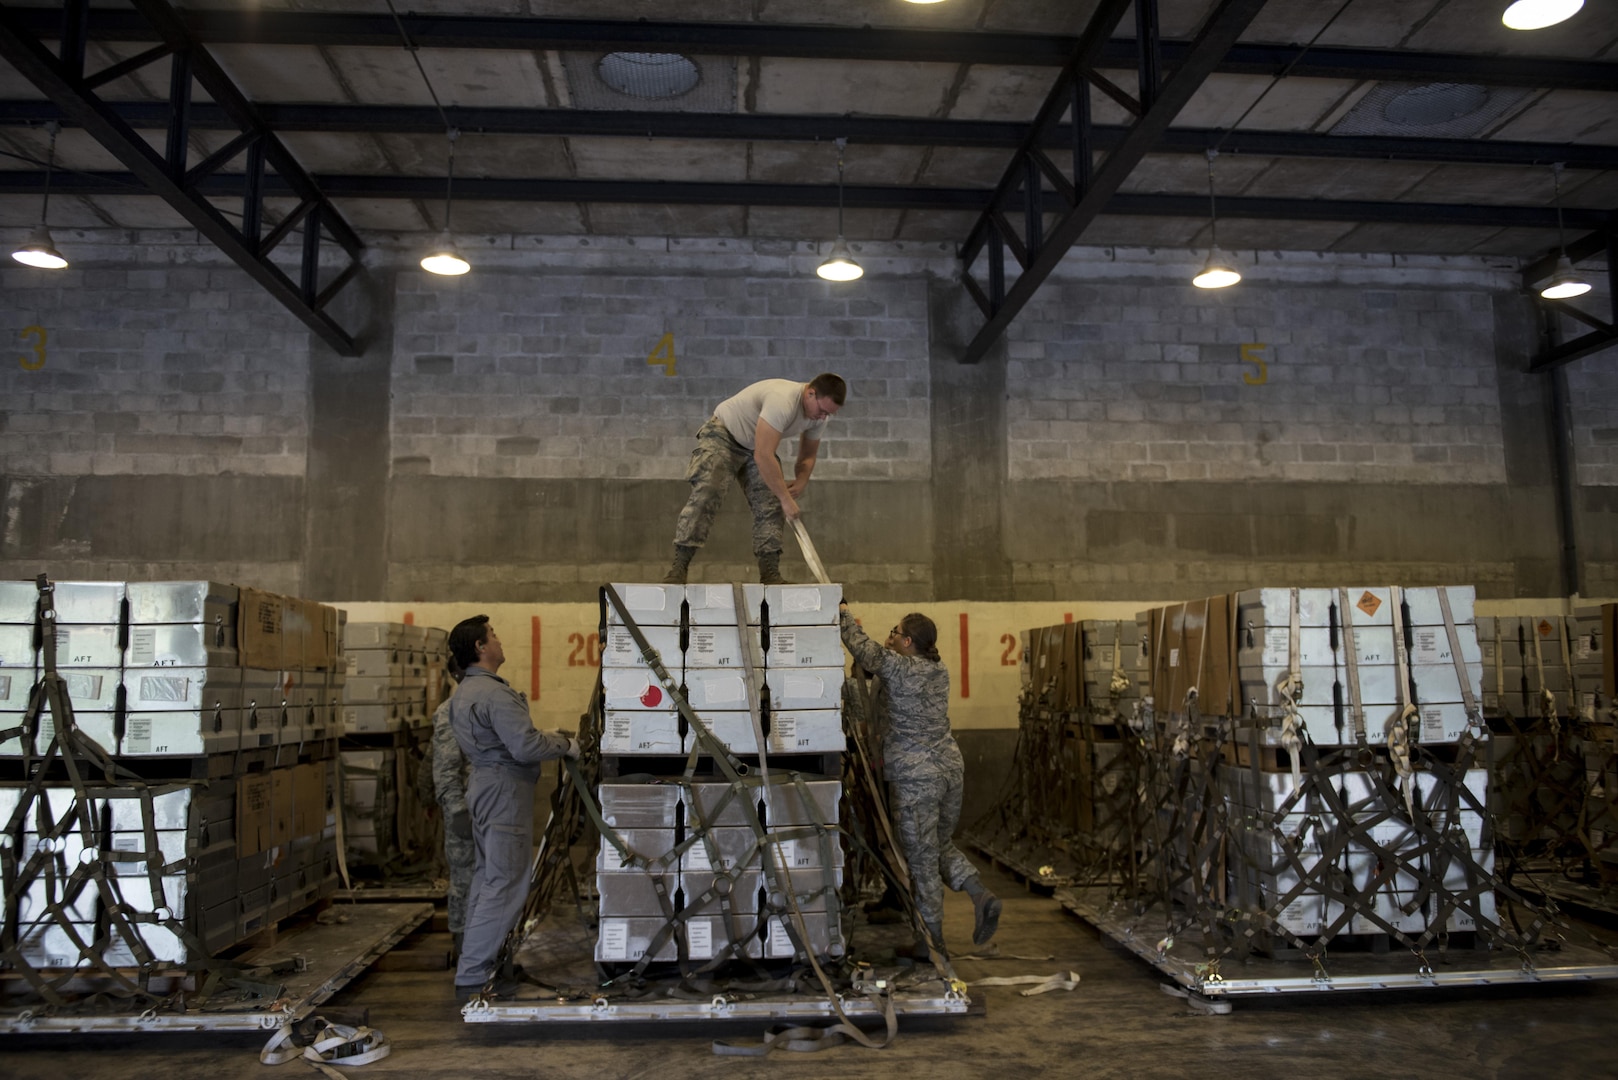 U.S. Air Force Airmen tie down and secure munitions to pallets during a Tactical Ammunition Rapid Response Package exercise Dec. 6, 2016, at Kadena Air Base, Japan. The TARRP exercise simulates how the squadron would rapidly prepare munition packages for transport downrange in times of war. (U.S. Air Force photo by Senior Airman Omari Bernard/Released)